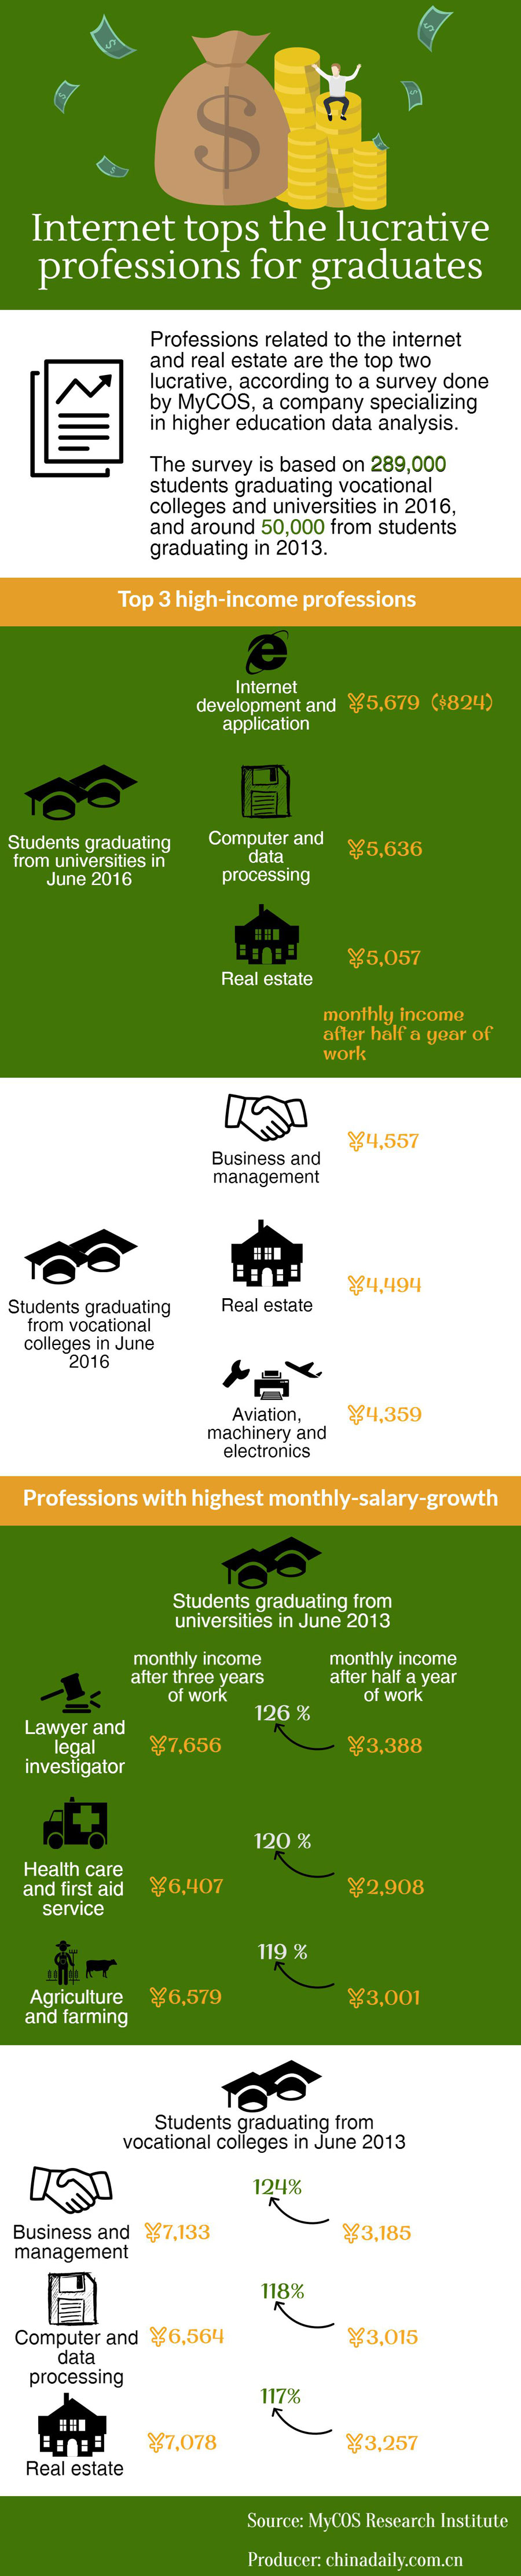 Internet tops the lucrative professions for graduates